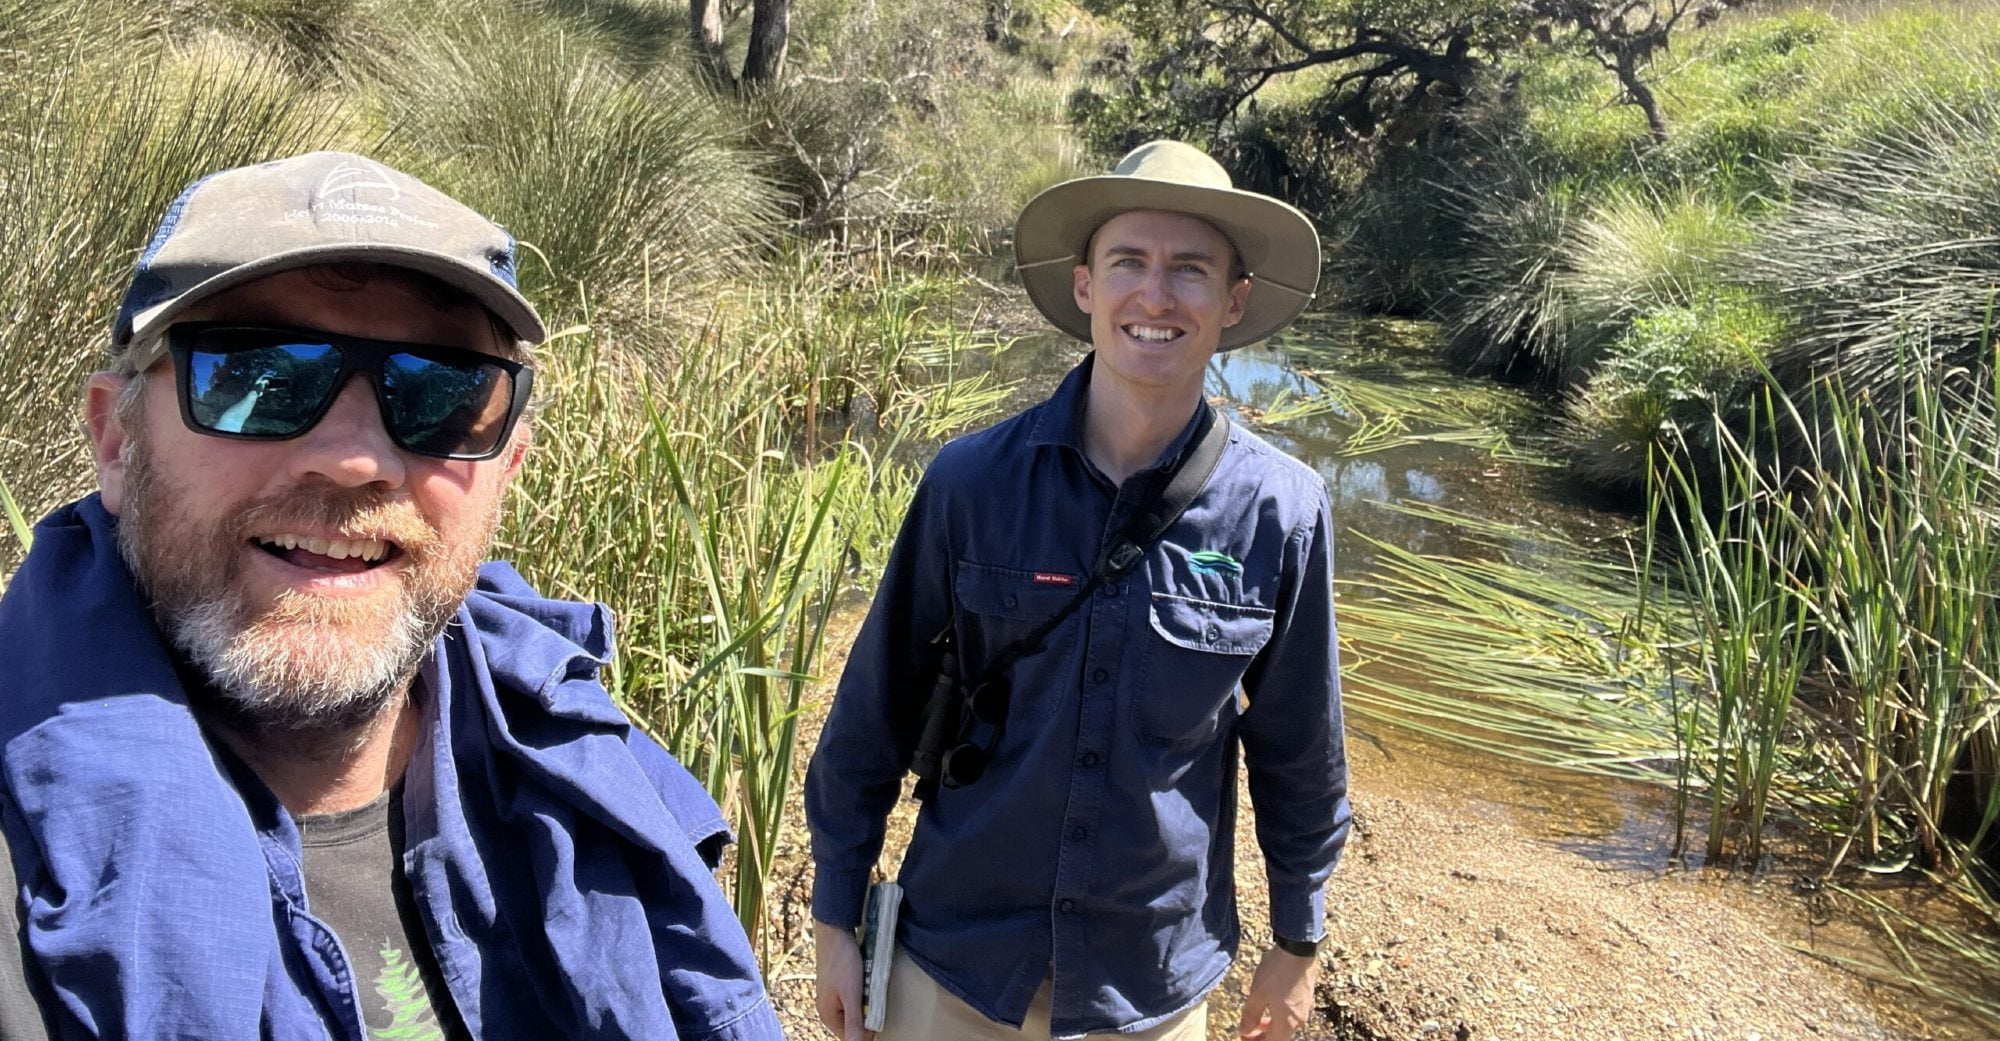 Two young men, one with a cap and sunglasses and the other wearing a wide-brimmed hat, smiling at the camera in a selfie photograph taken by a creek in Australia.